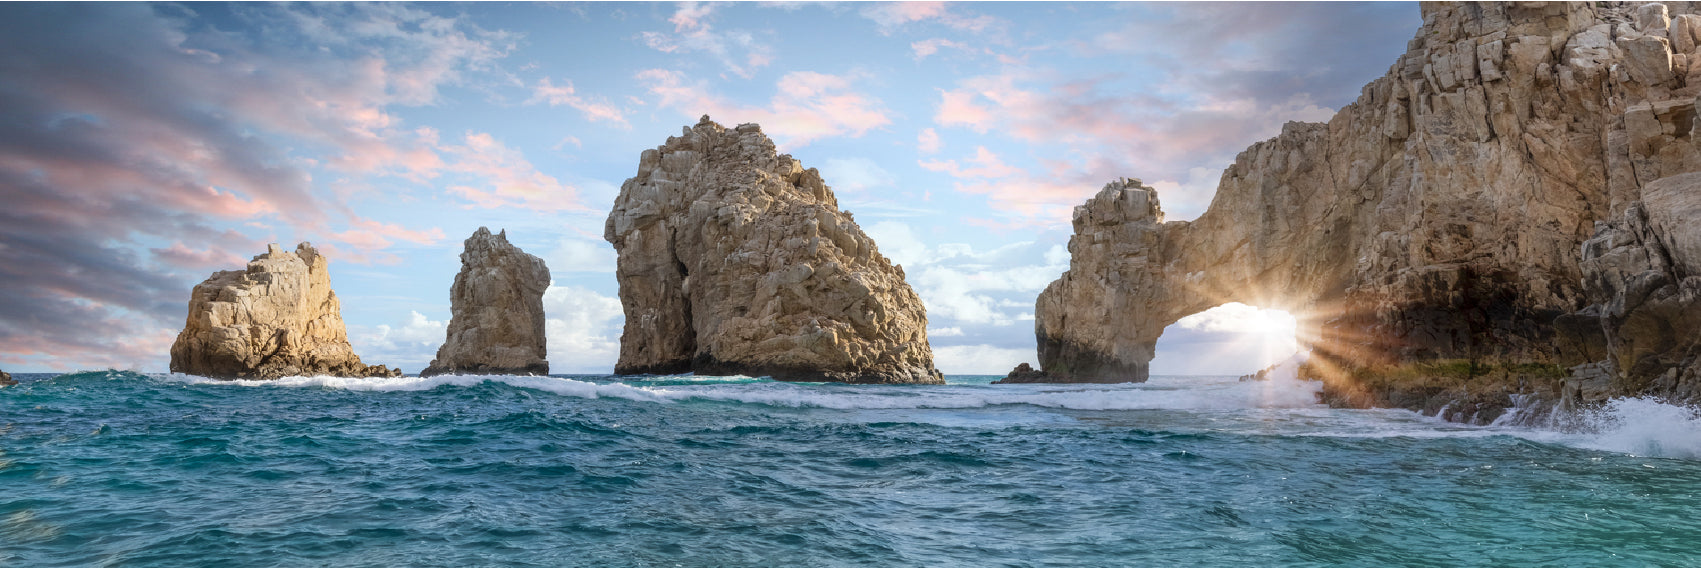 Panoramic Canvas Cabo San Lucas Beach View Photograph High Quality 100% Australian Made Wall Canvas Print Ready to Hang